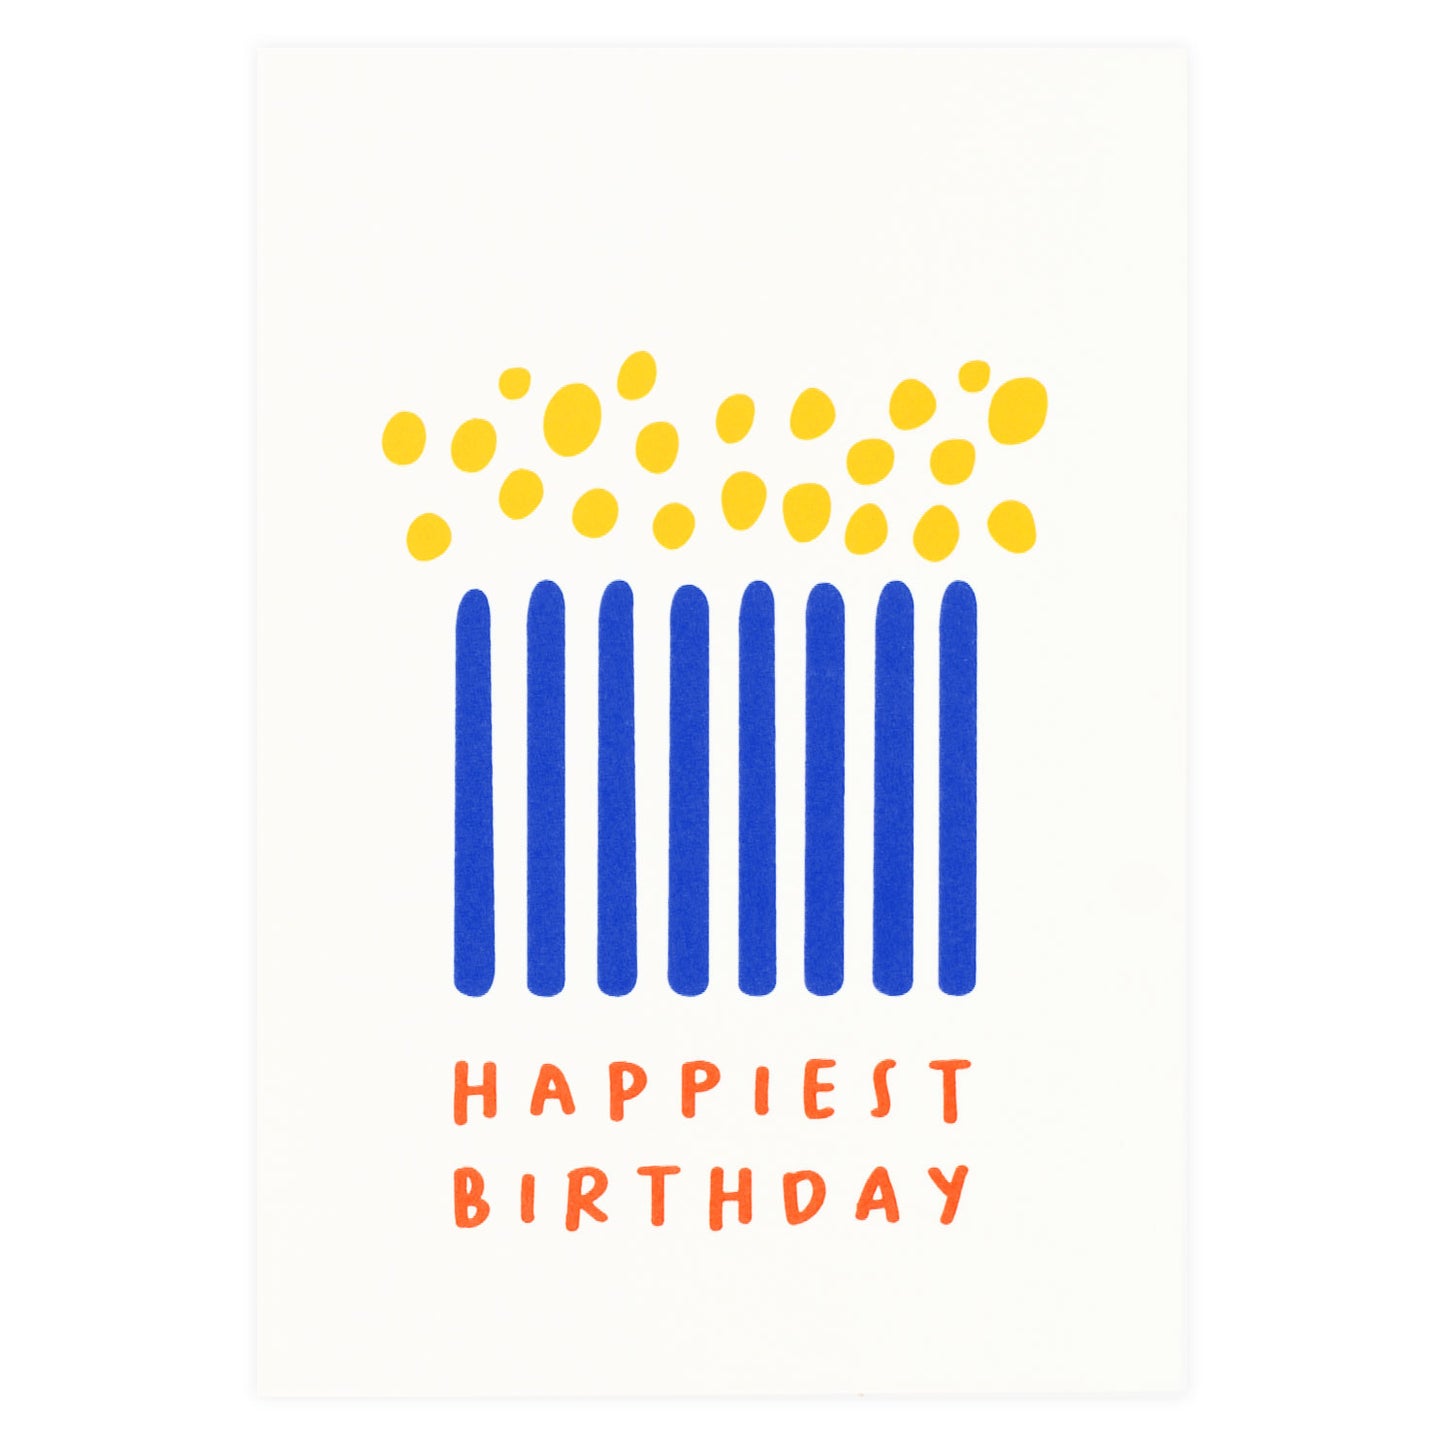 Graphic Factory Happiest Birthday Card 